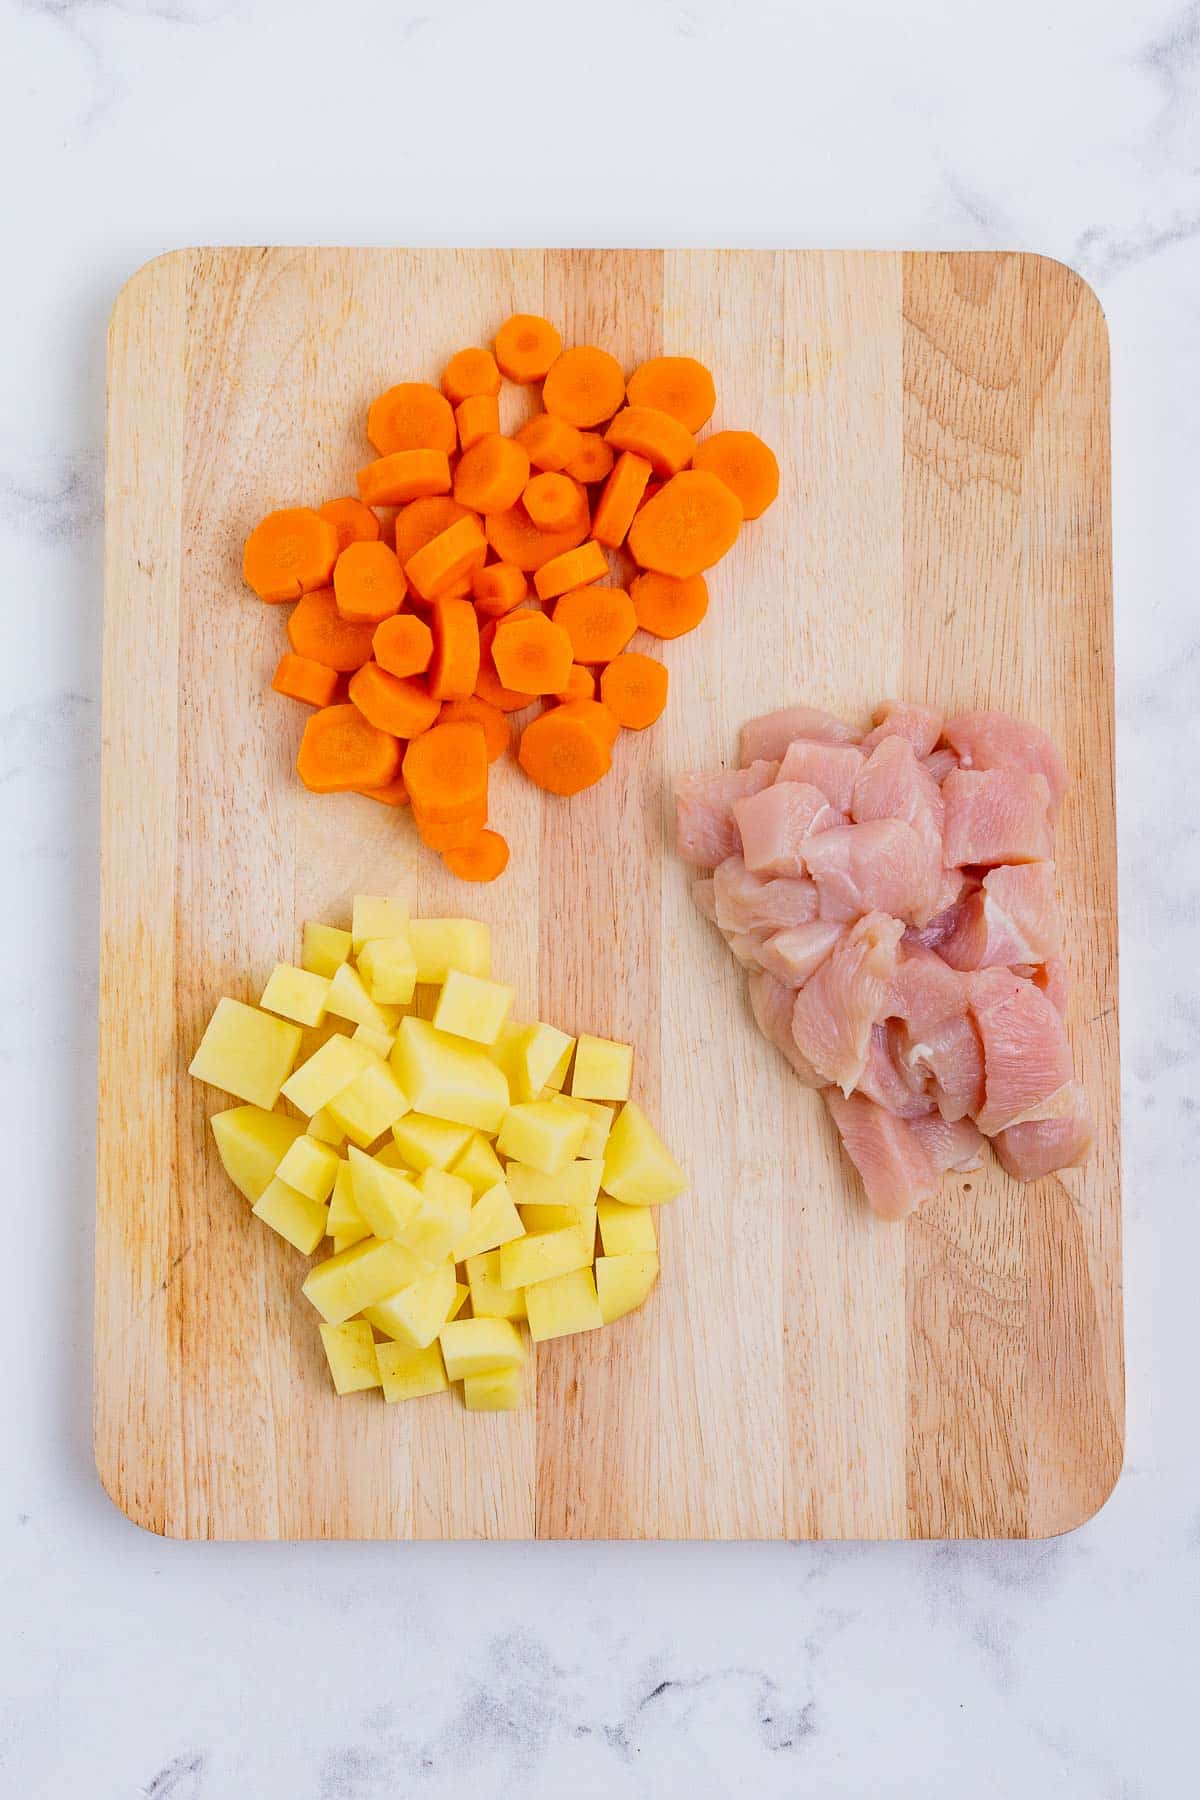 Carrots, potatoes, and chicken are cut into chunks.